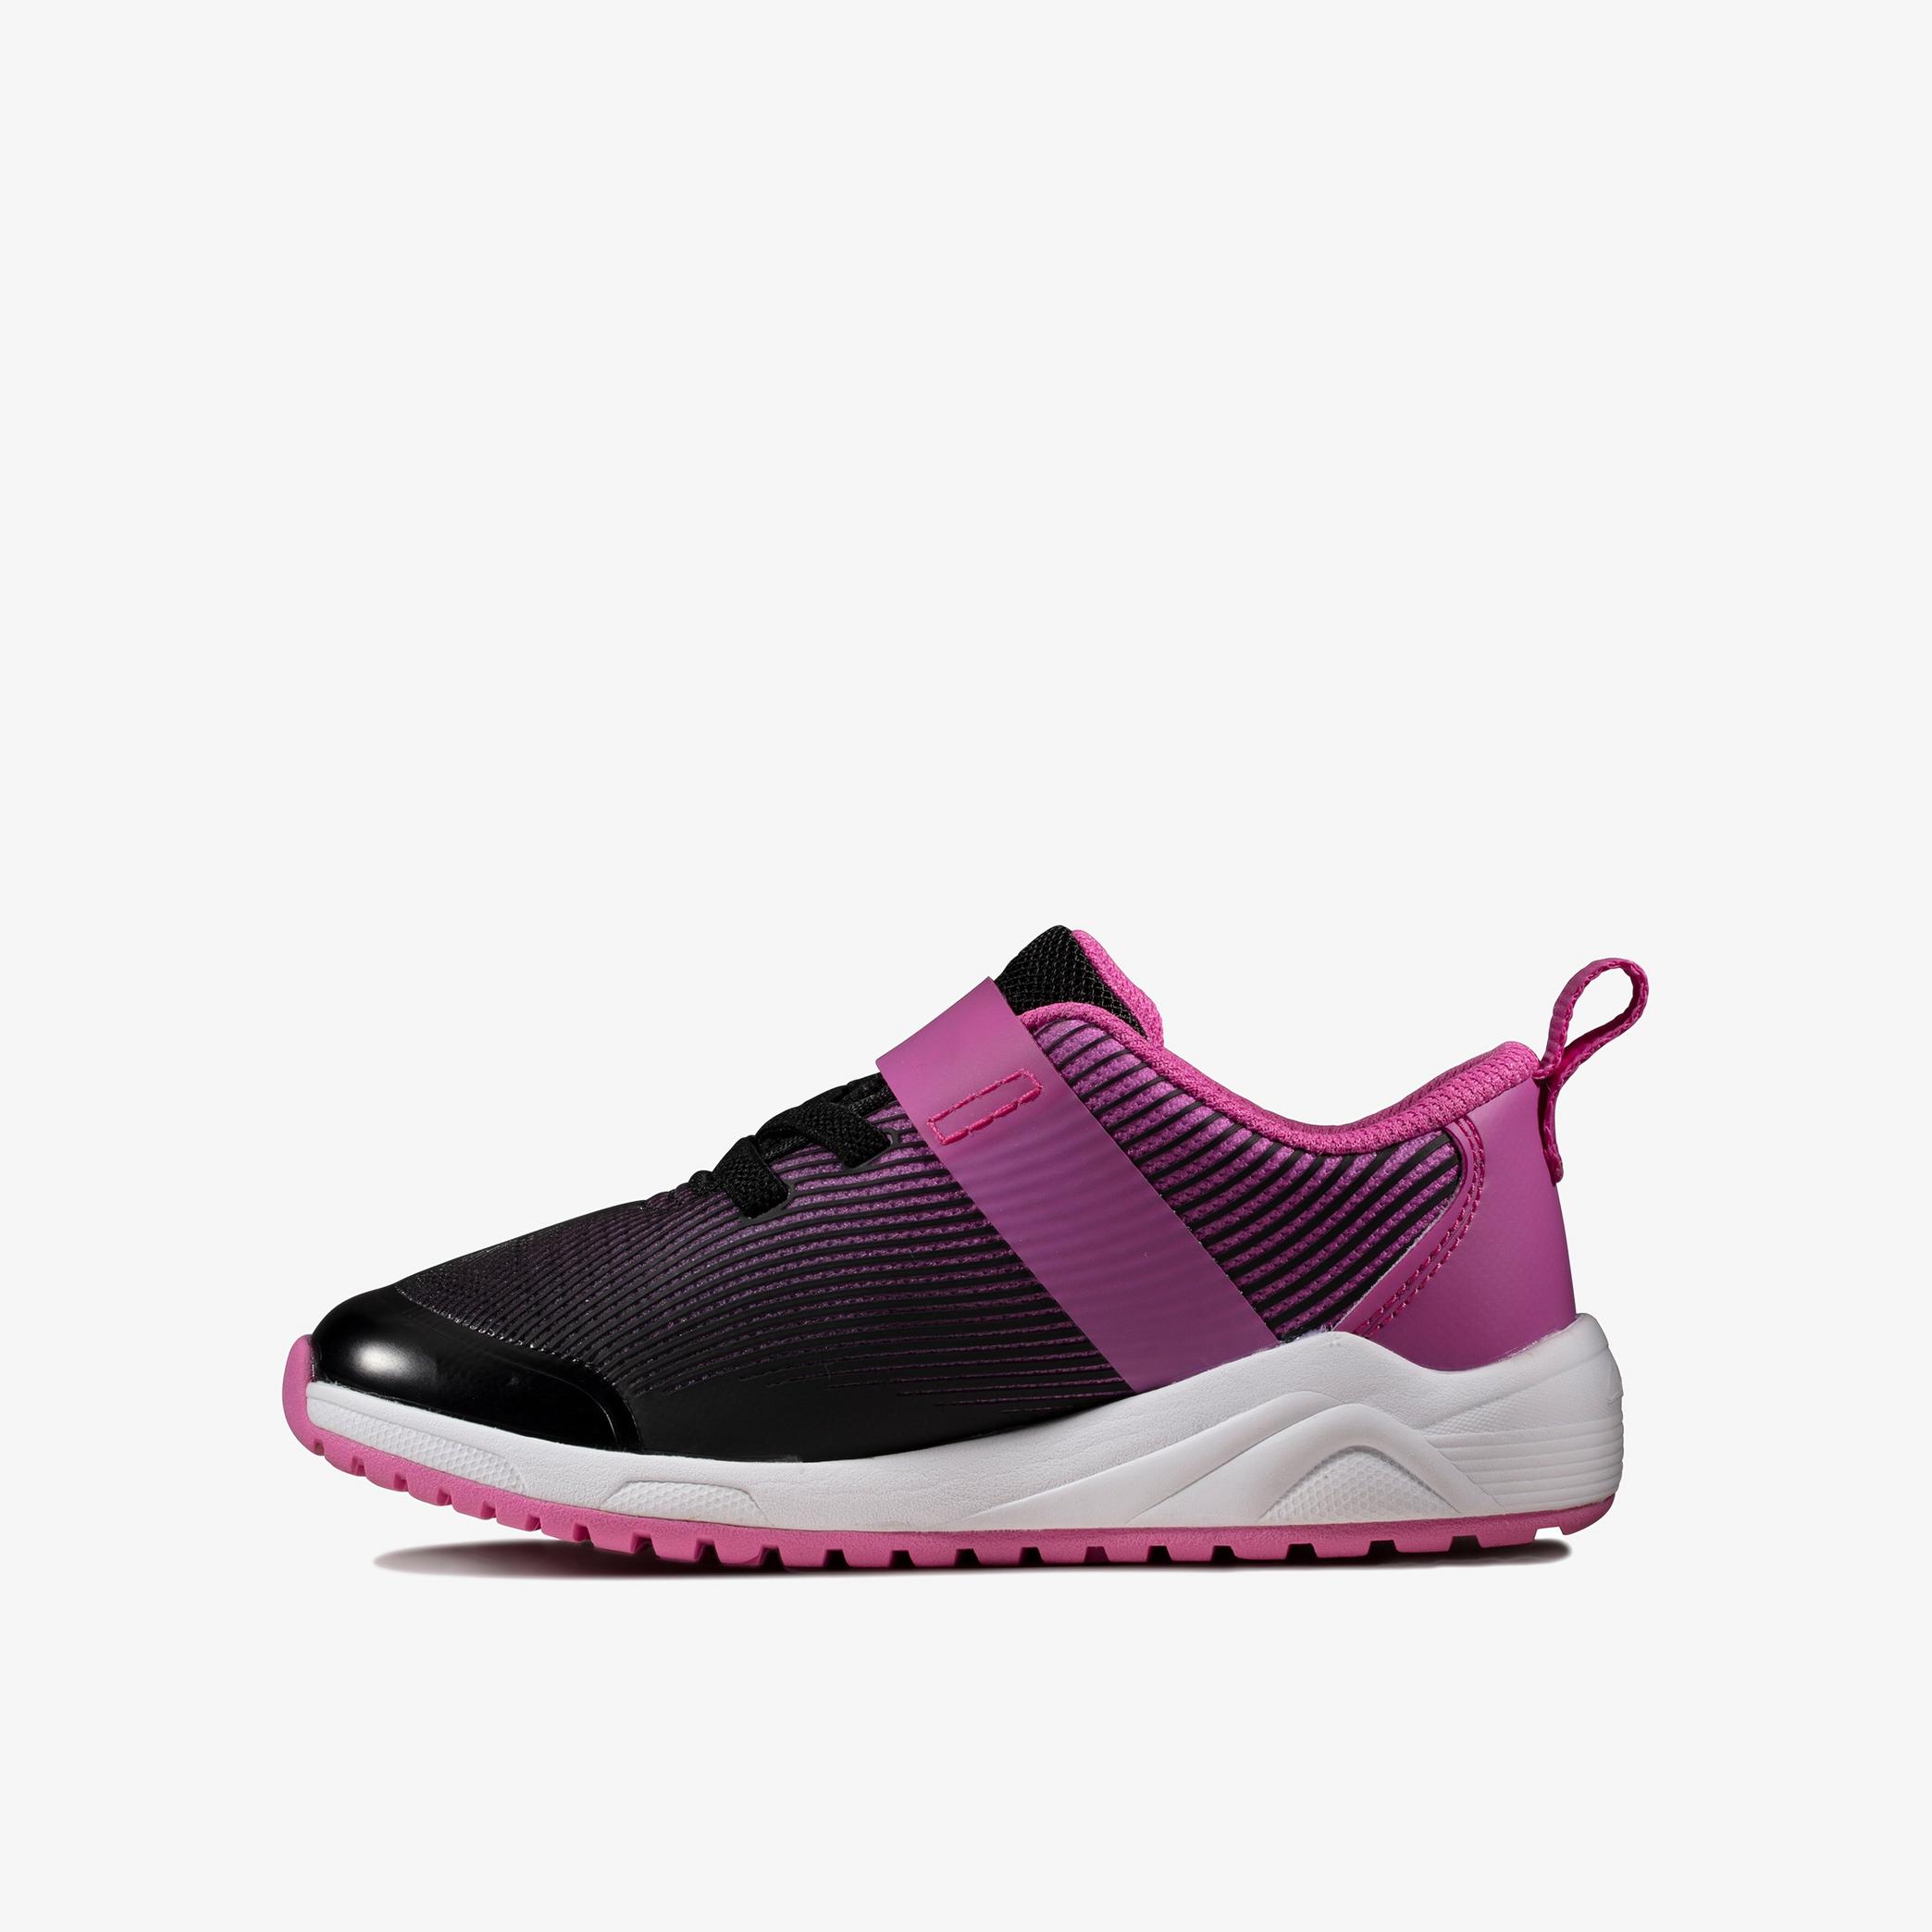 GIRLS Aeon Pace Toddler Pink Trainers | Clarks Outlet